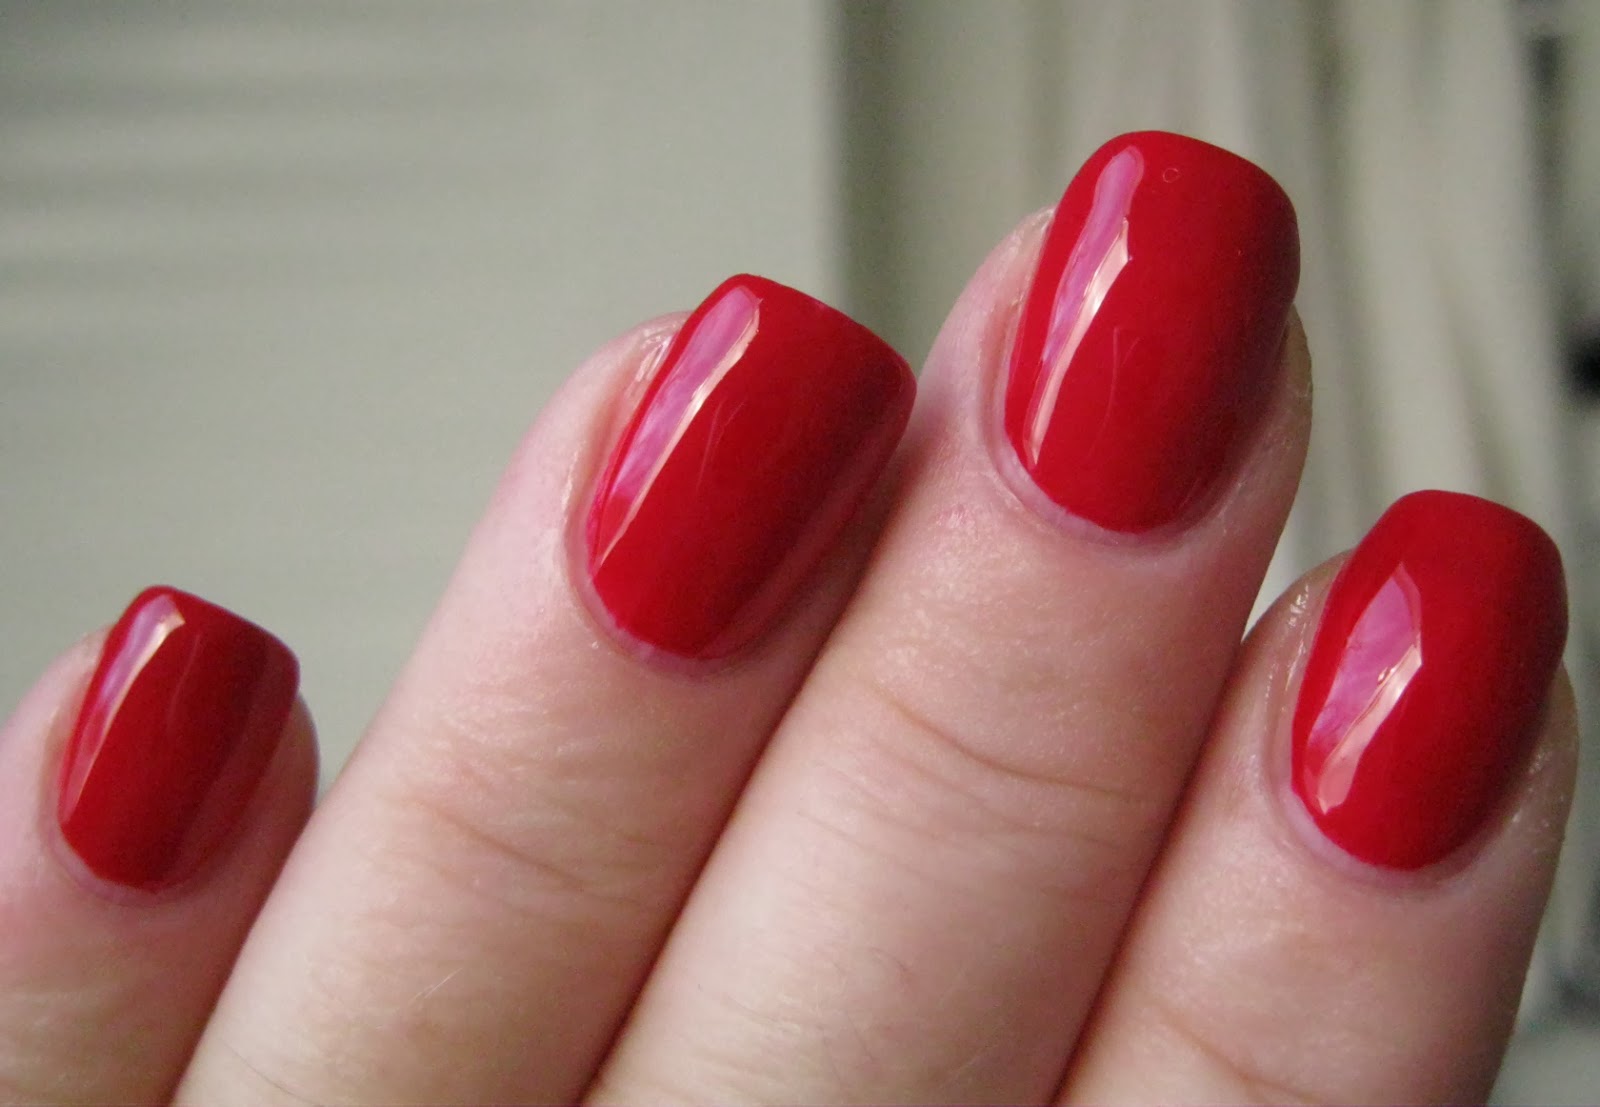 10. Butter London Nail Lacquer in "Come to Bed Red" - wide 6